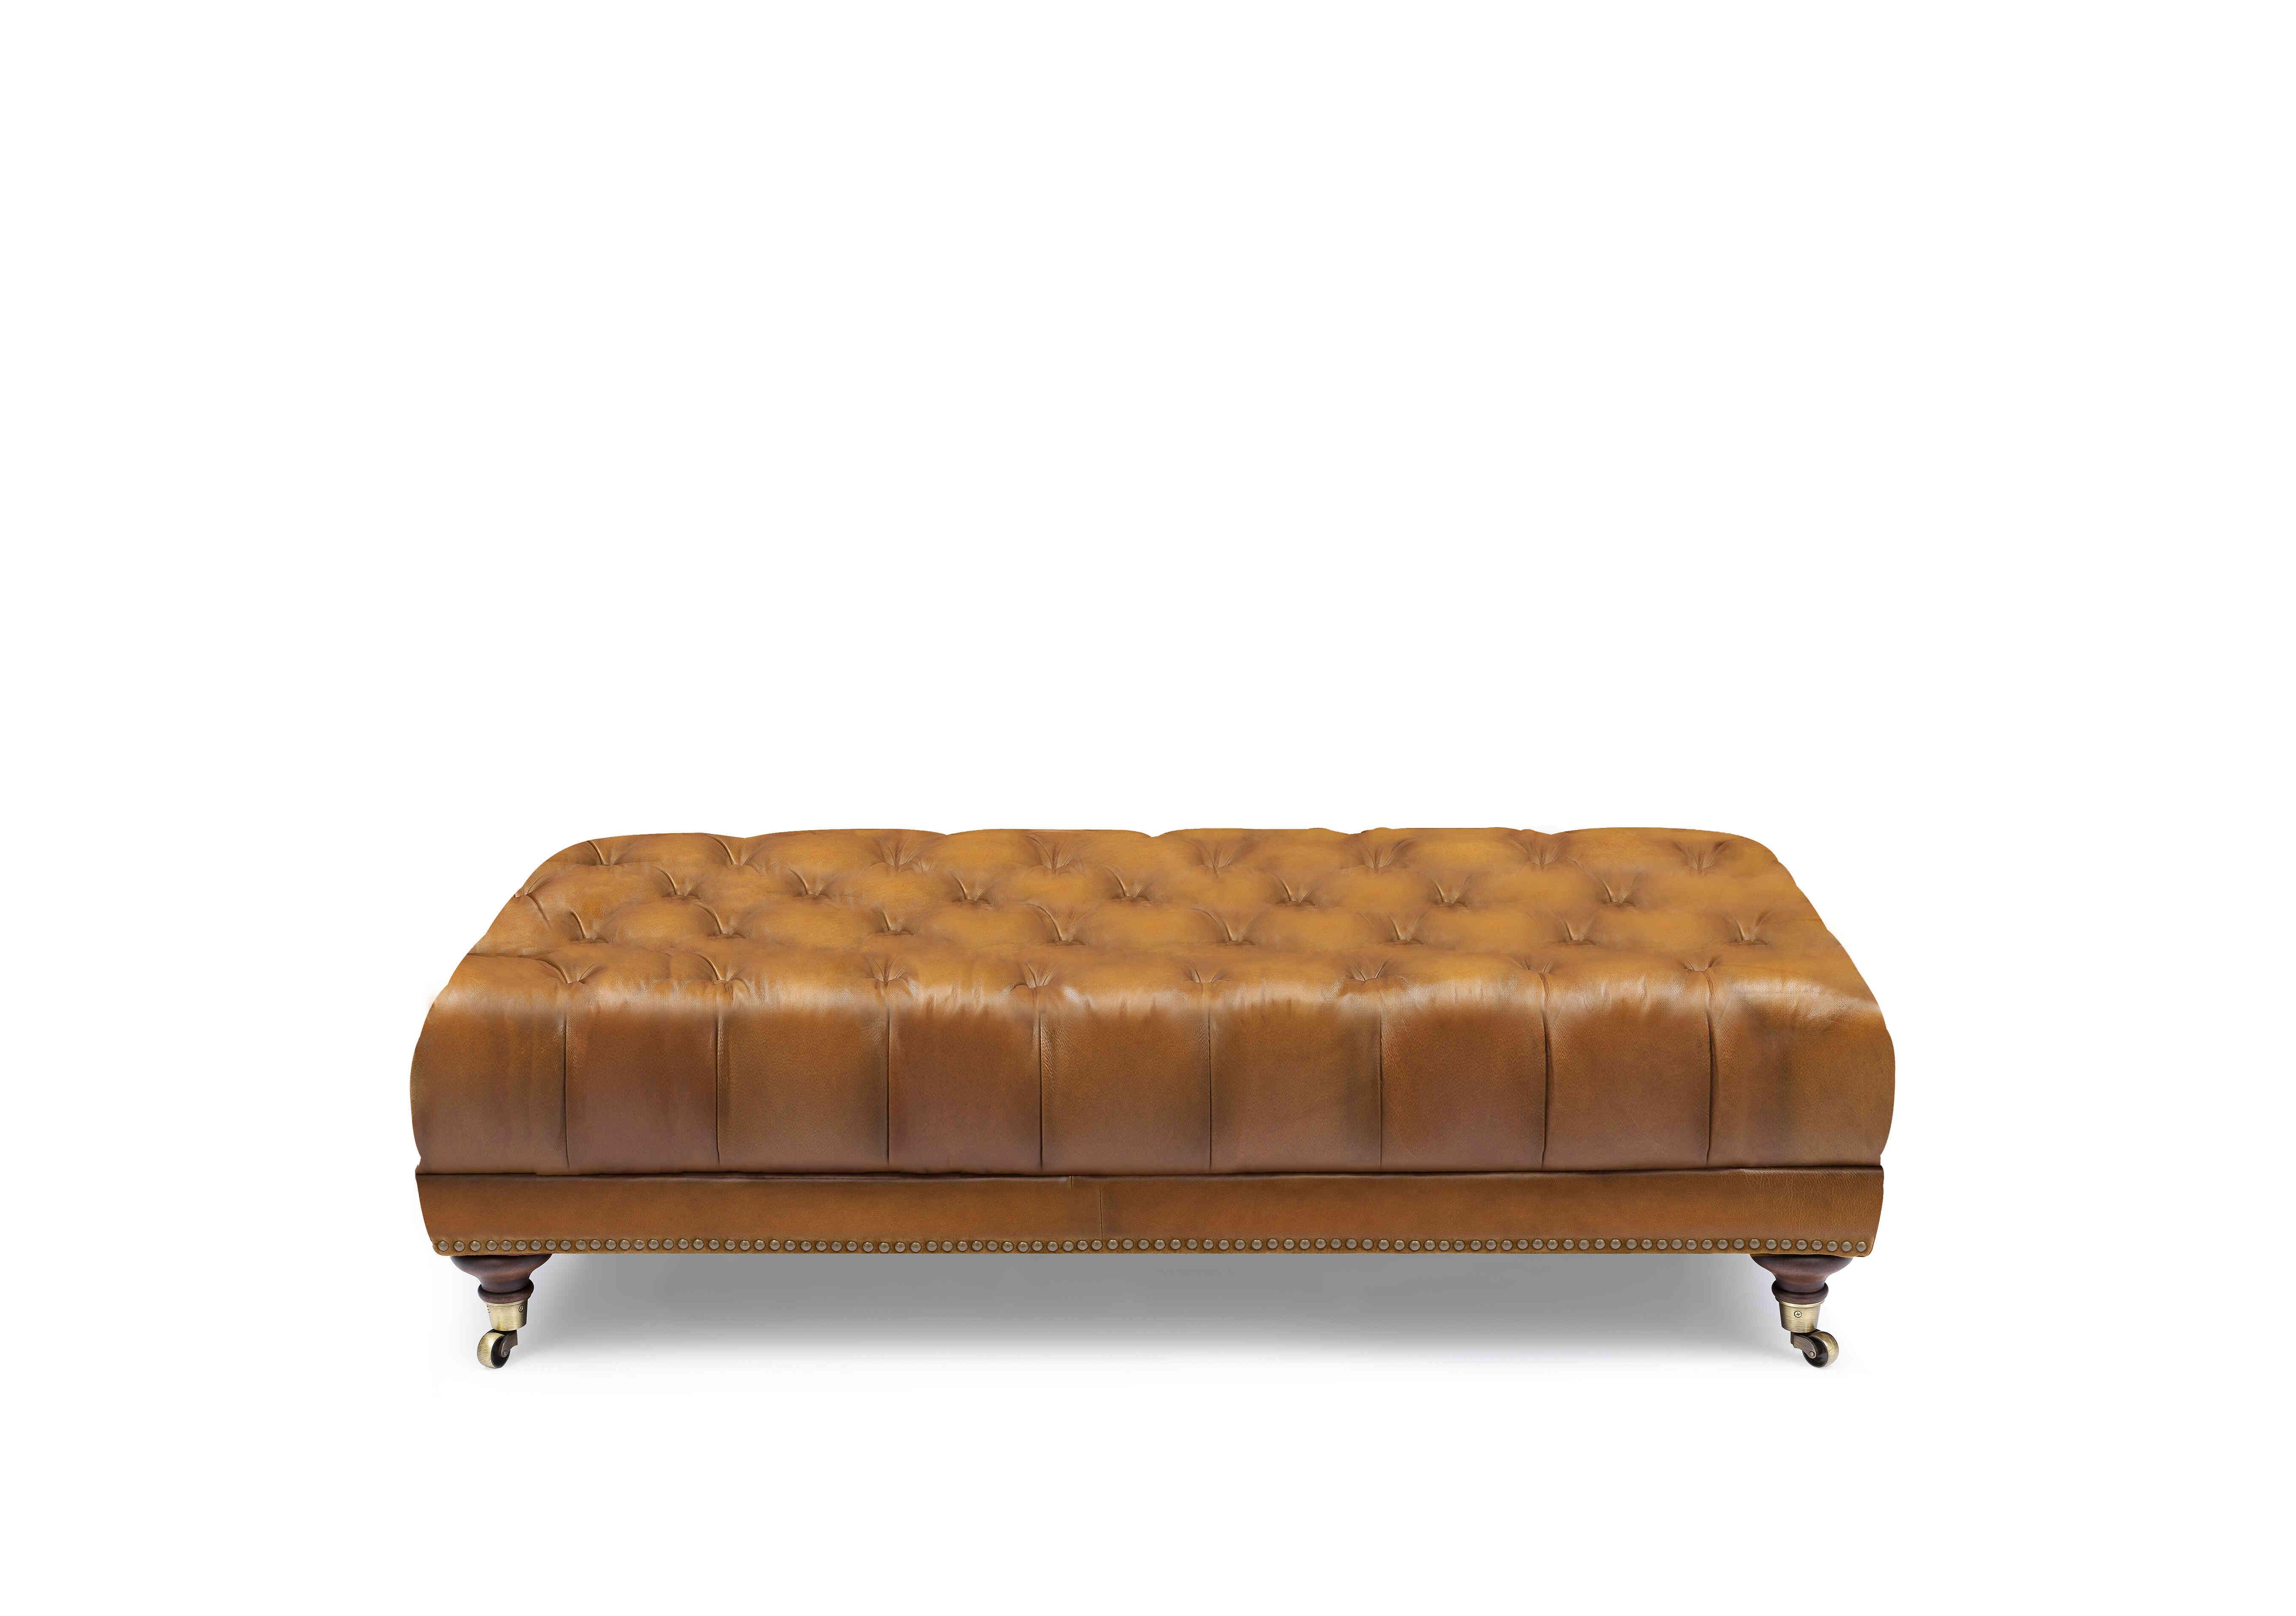 Wallace Leather Rectangular Footstool with Castors in X3y1-1957ls Inca on Furniture Village